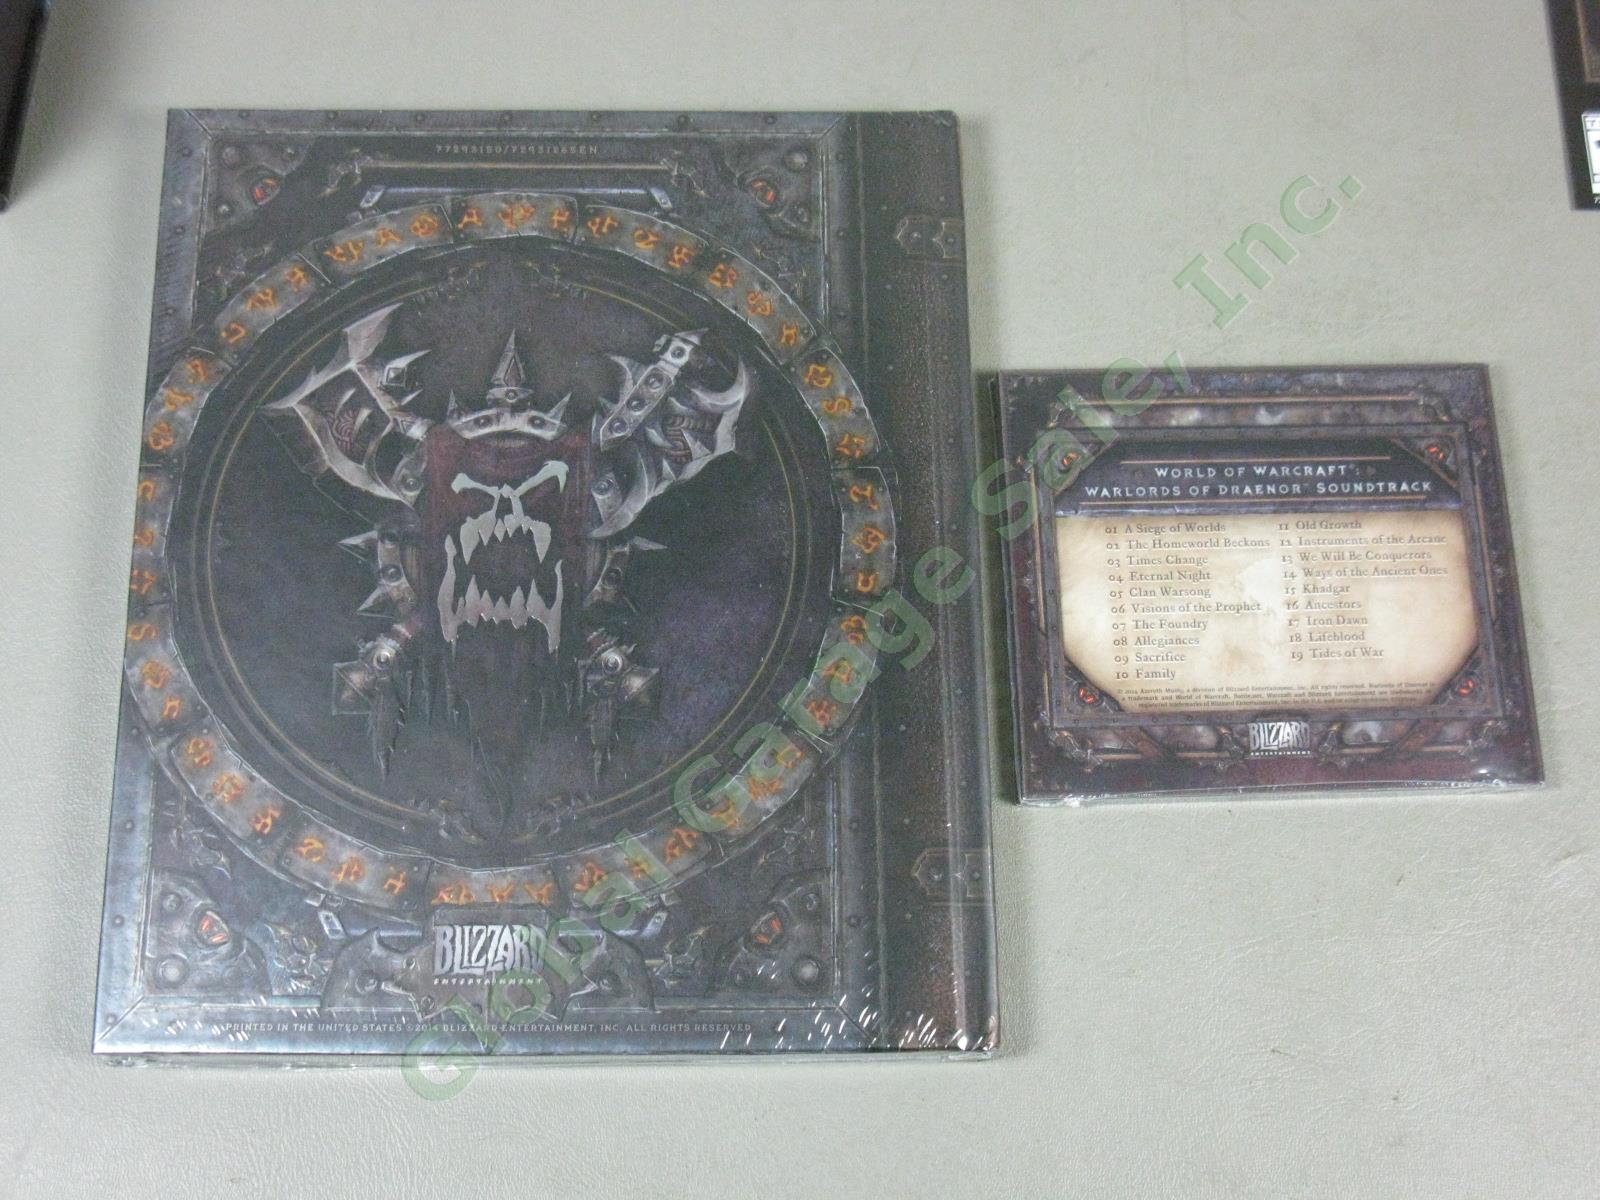 World Of Warcraft Warlords Of Draenor Collectors Edition Sealed Book CD DVD NR! 5